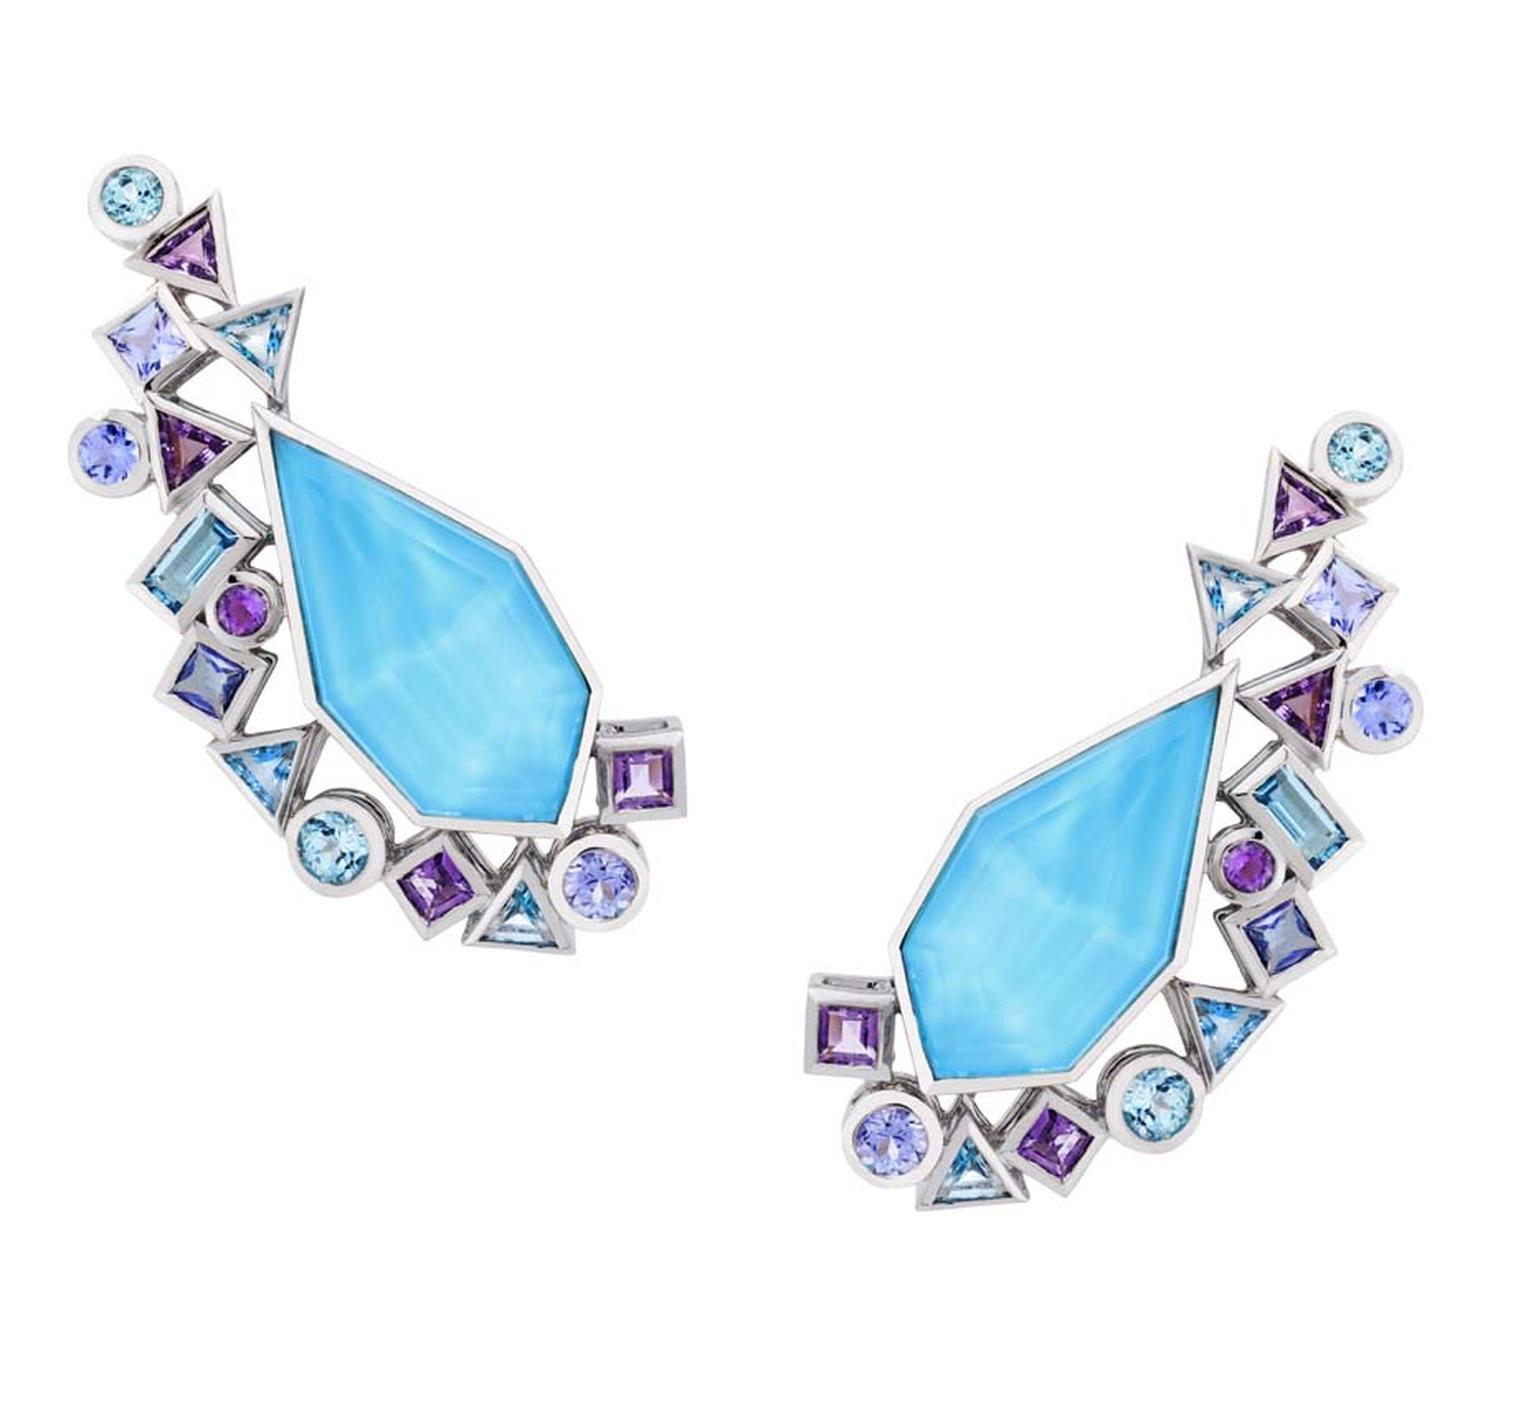 Stephen Webster earrings from the new Gold Struck collection, featuring a central sky-blue facetted crystal with bezel-set blue and mauve stones.